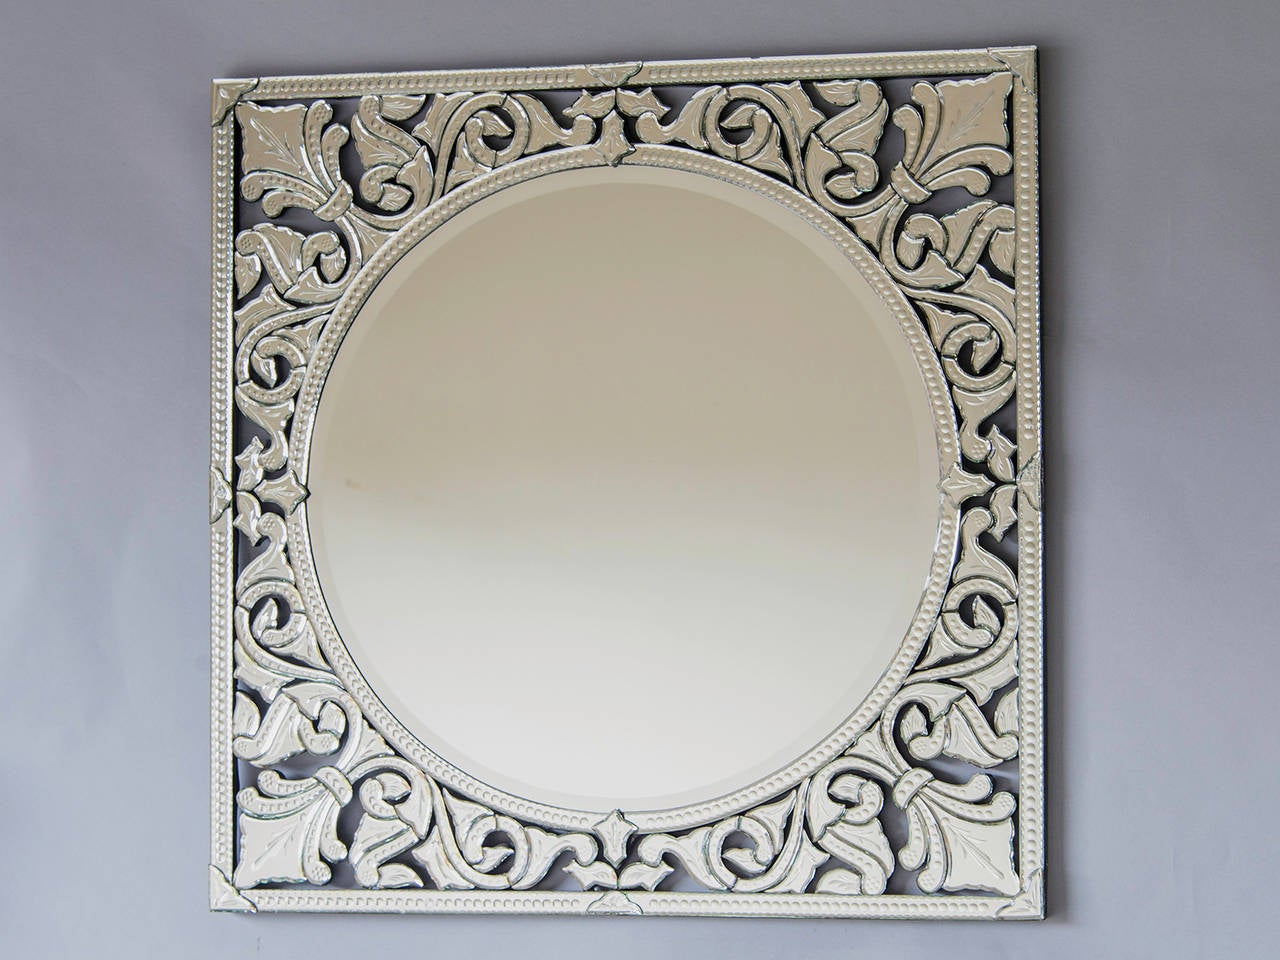 Pair of square Venetian mirrors, Italy. These highly decorative Venetian mirrors feature an unusual shape with all of the cut and pierce work design contained within a square frame. The circular centre mirror is surrounded by a symmetrical